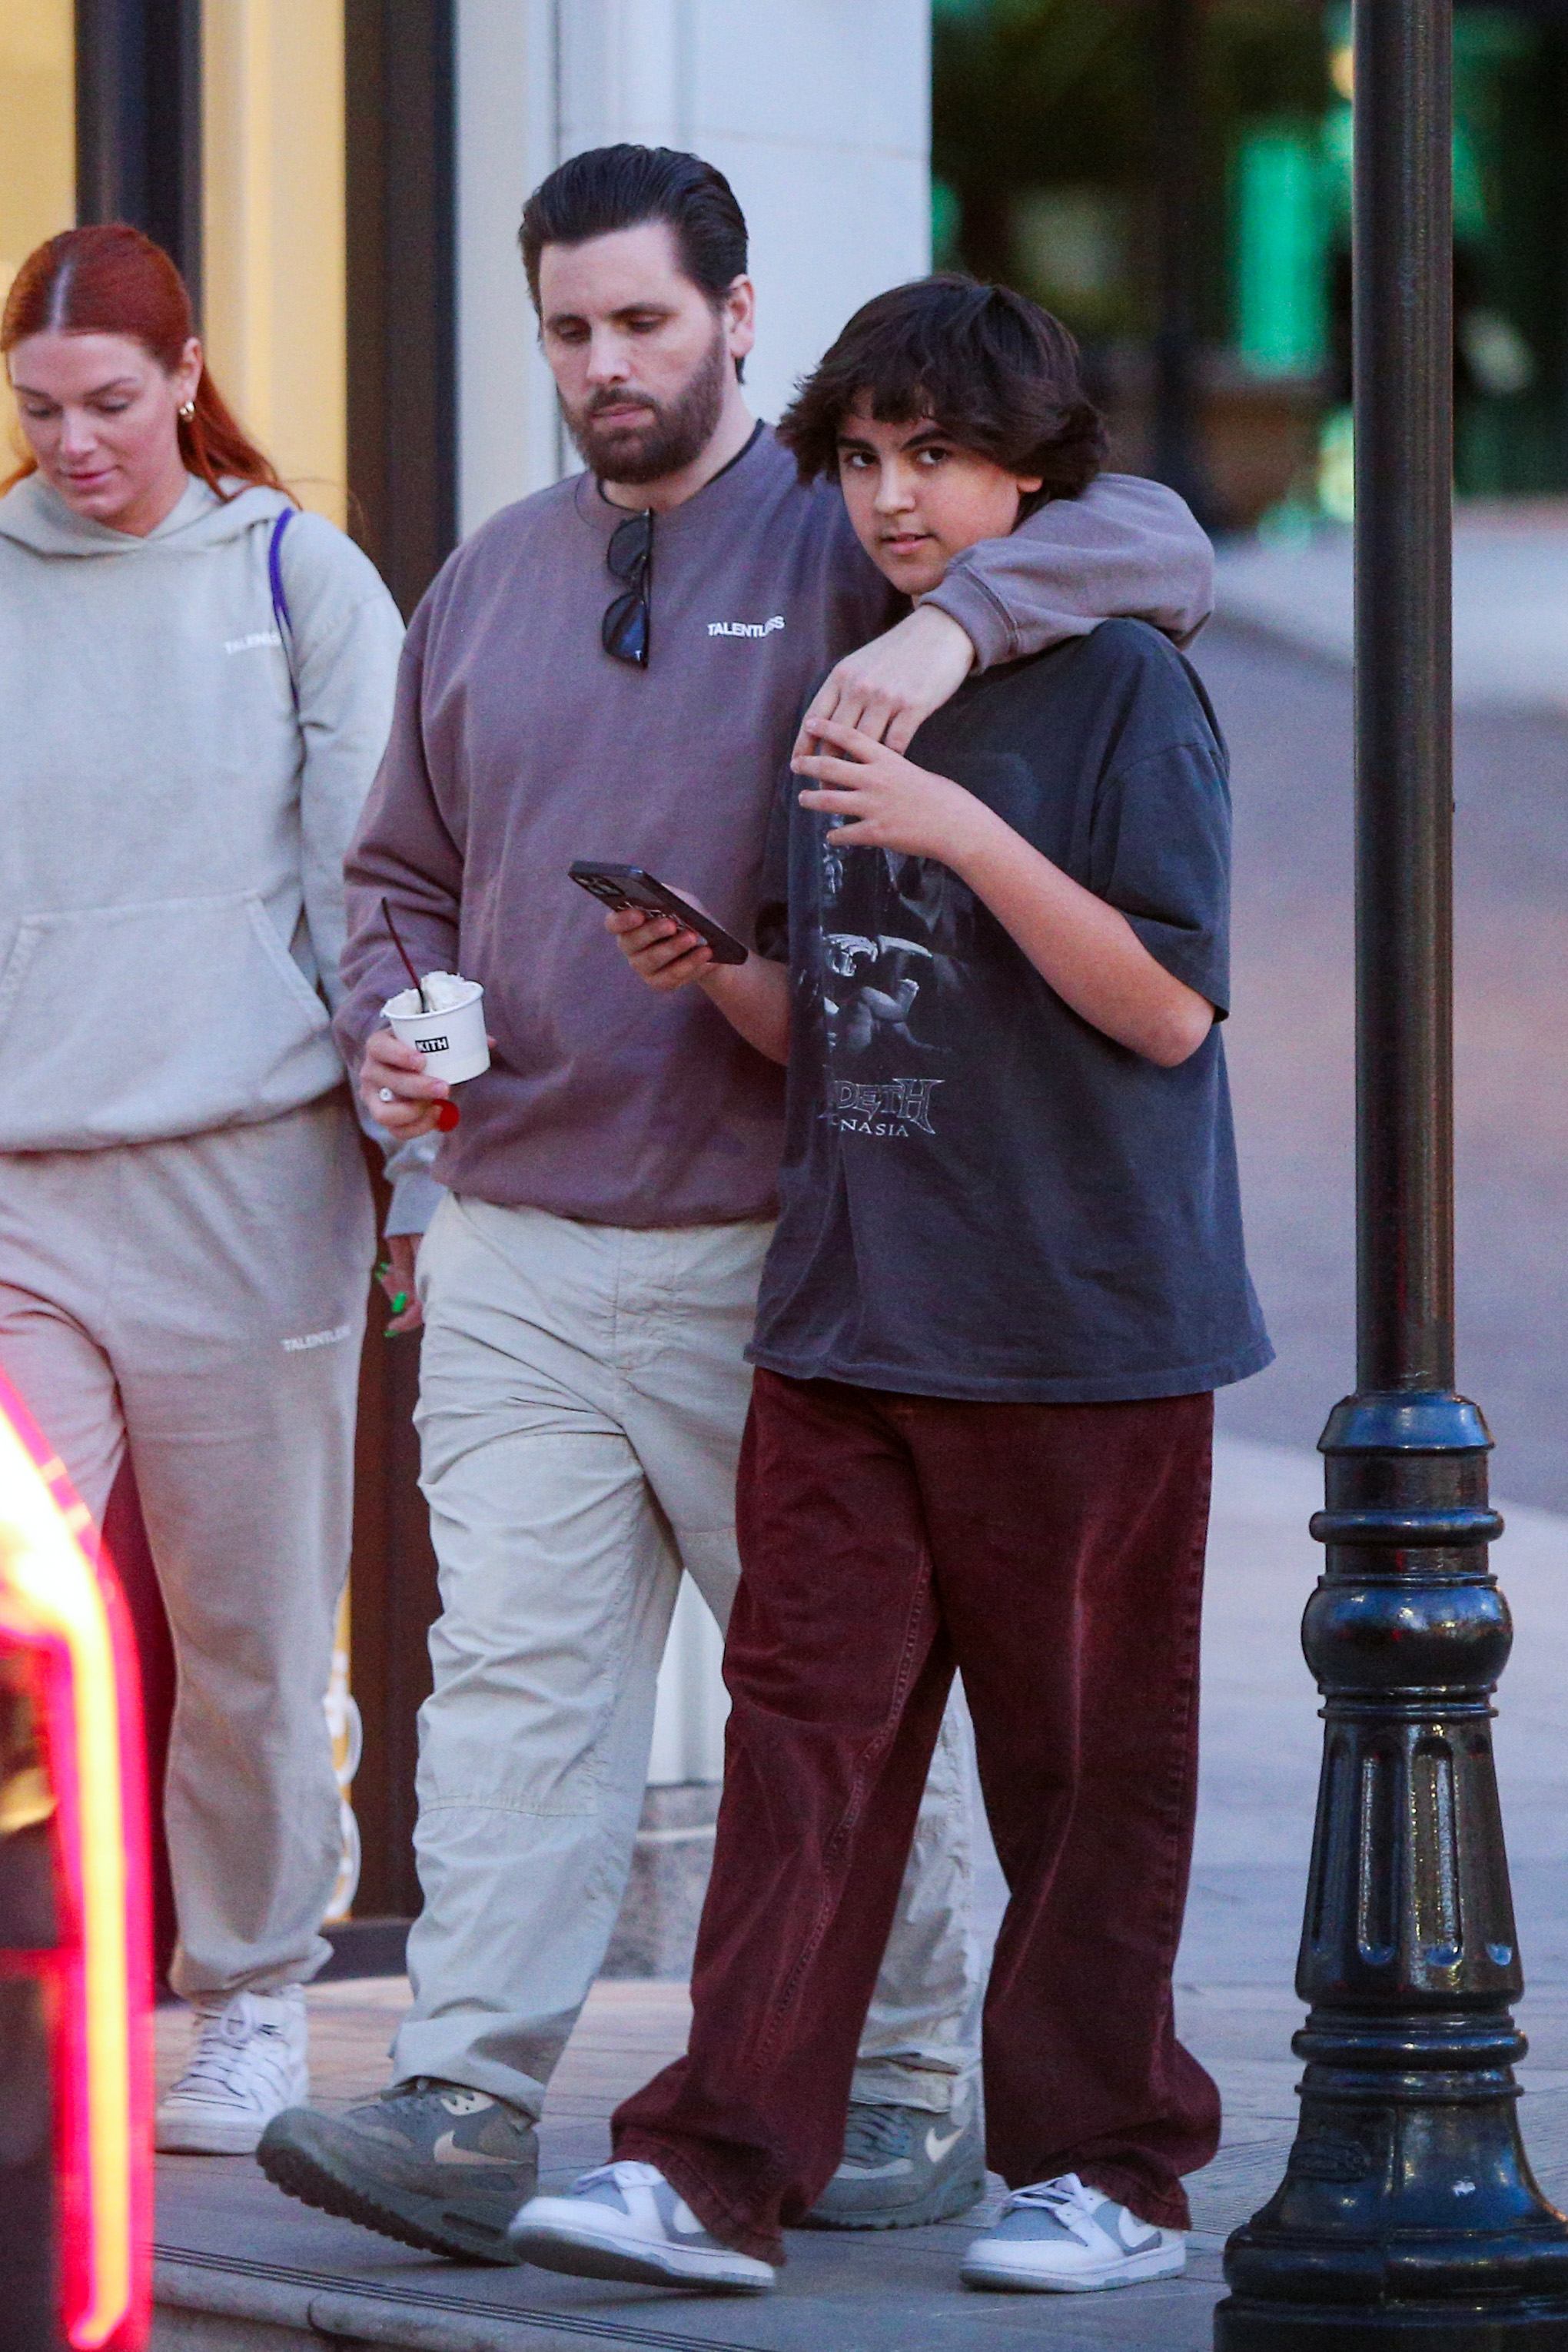 Mason Disick, 13, looks nearly as tall as dad Scott on afternoon outing